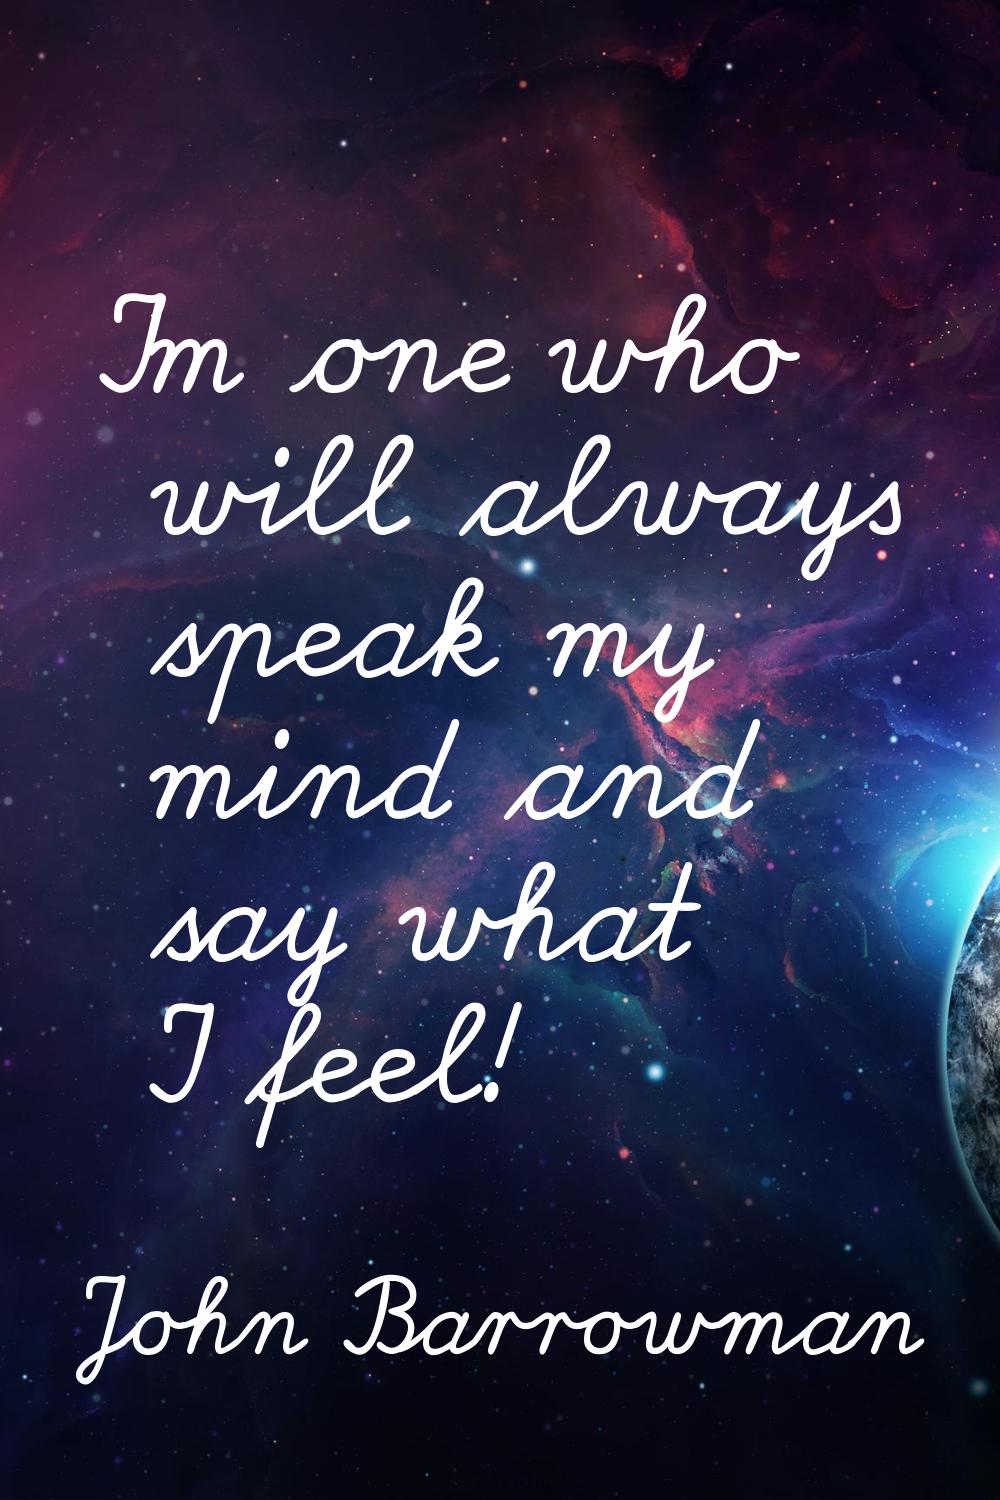 I'm one who will always speak my mind and say what I feel!